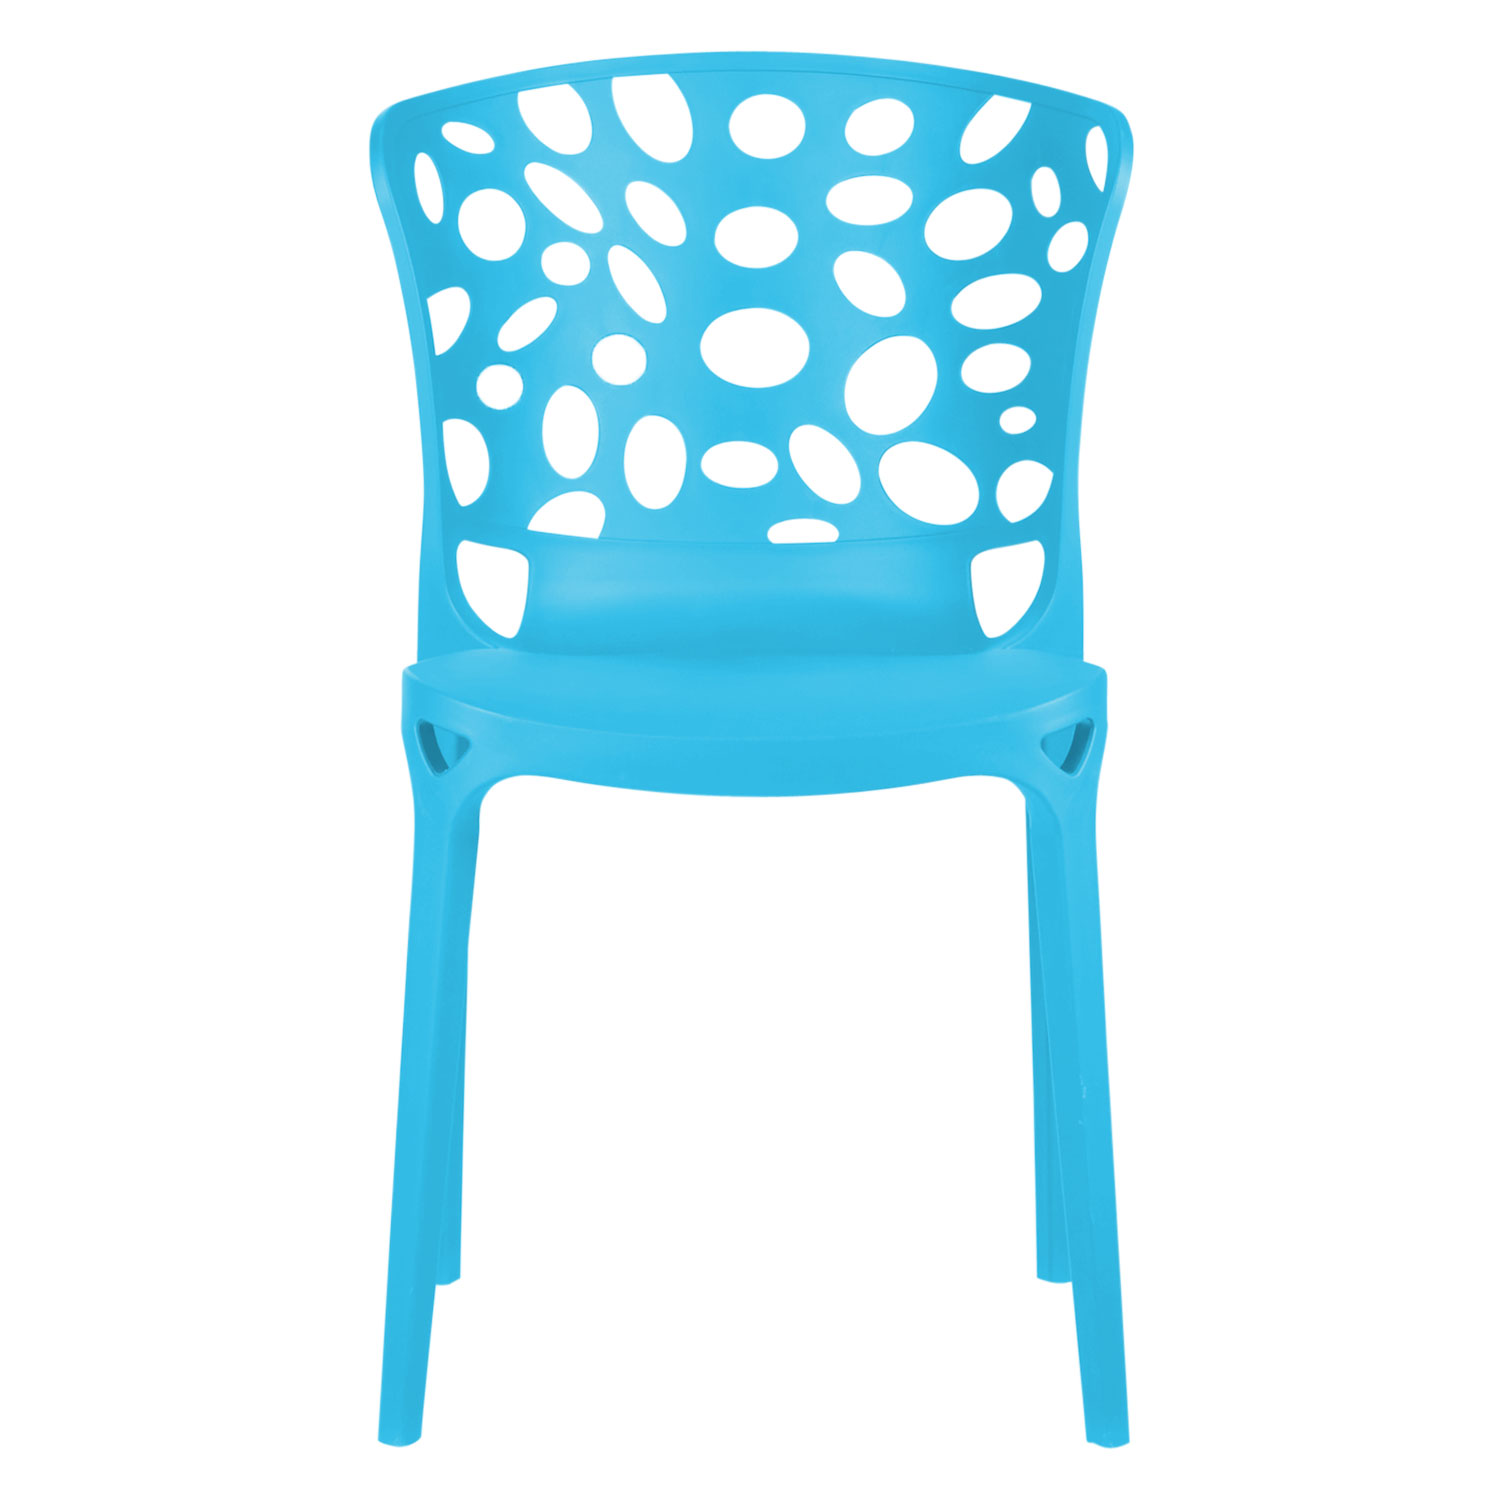 Garden chair Set of 4 Modern Blue Camping chairs Outdoor chairs Plastic Stacking chairs Kitchen chairs